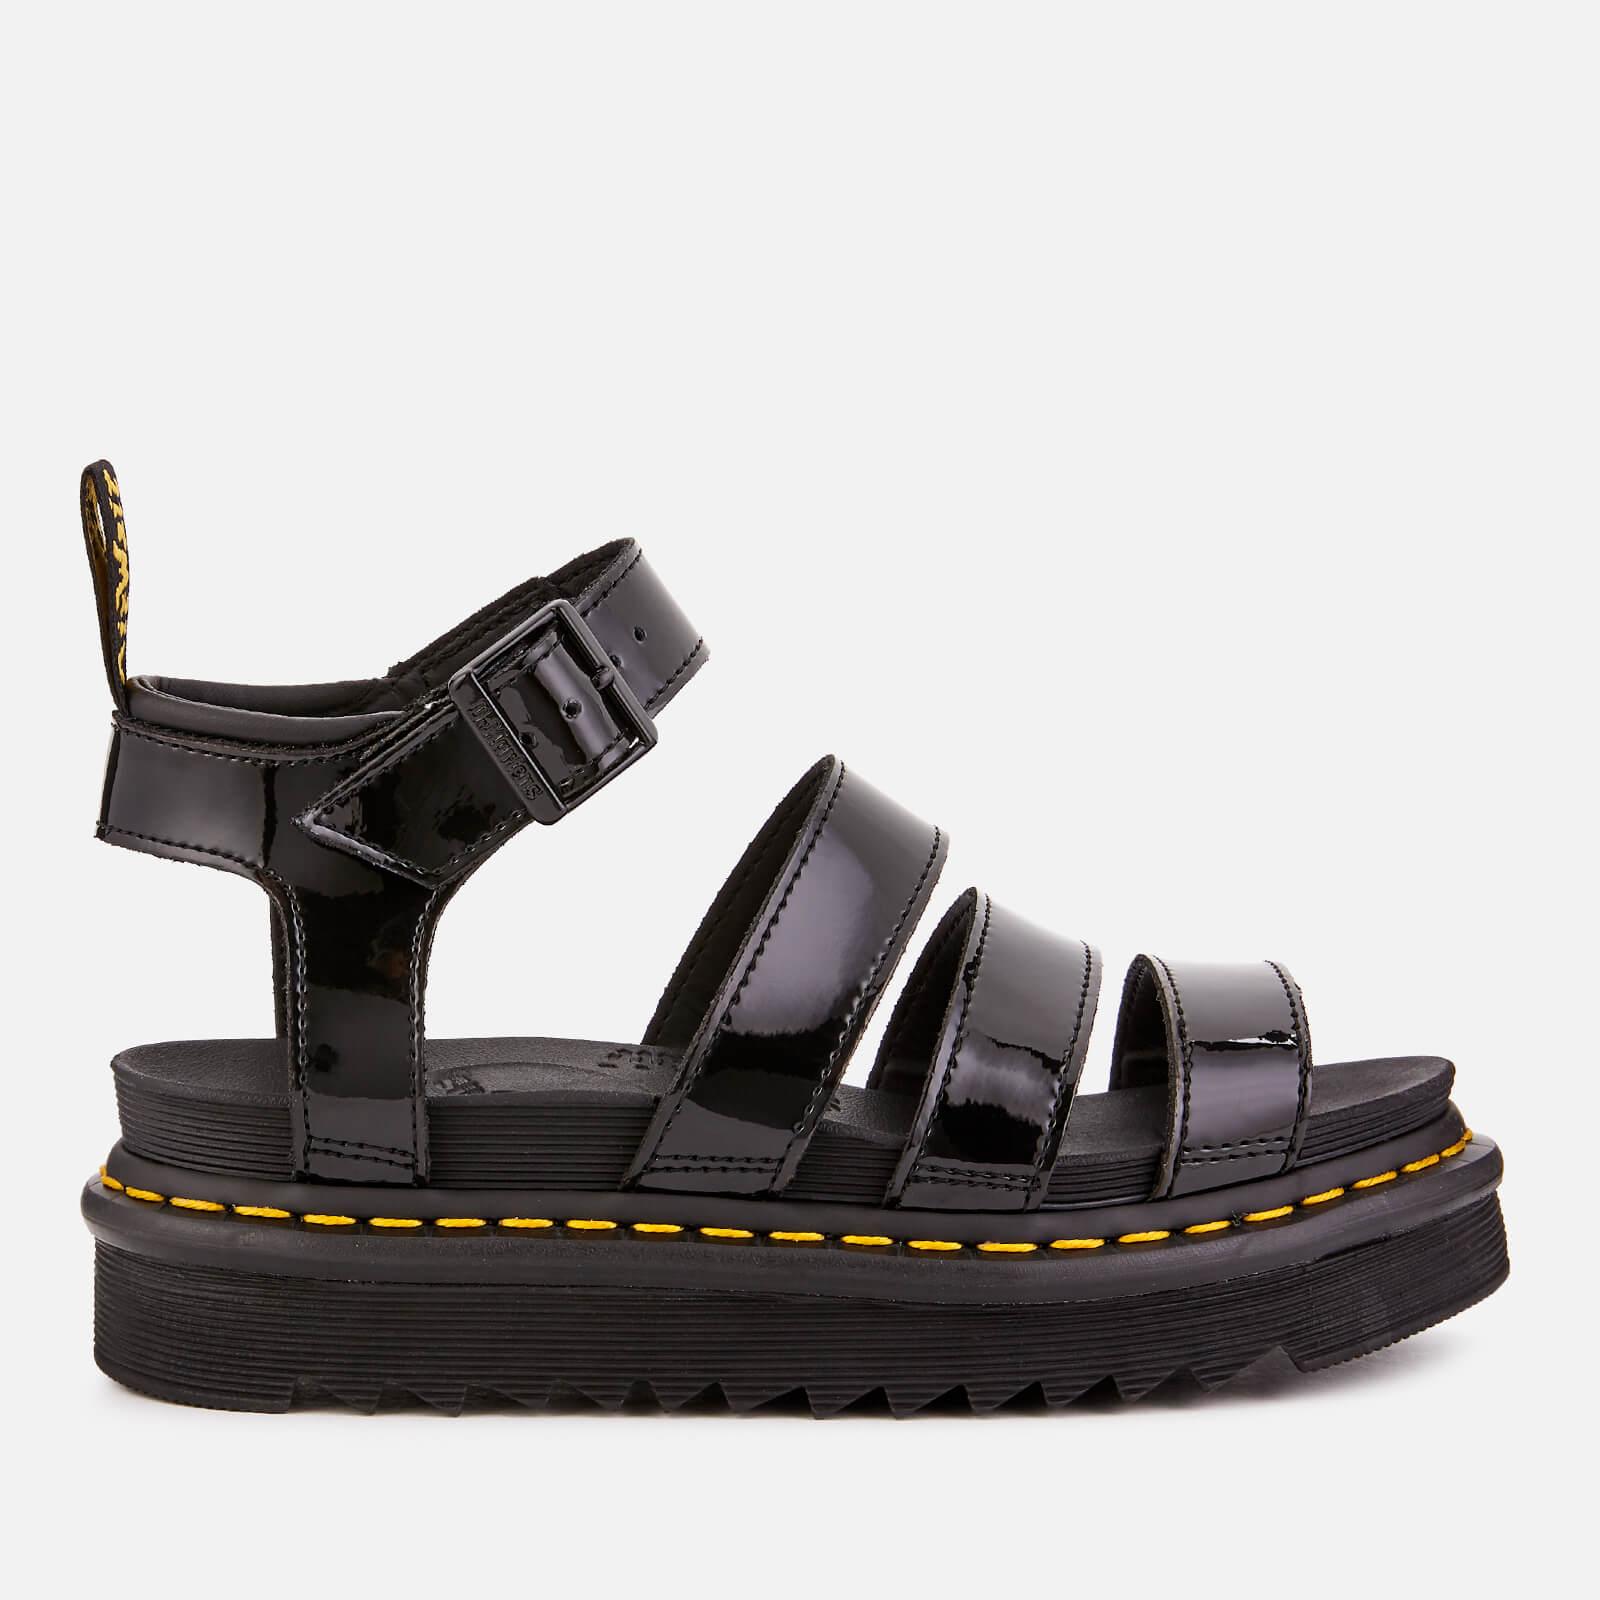 Dr. Martens Blaire Patent Lamper Strappy Sandals in Black | Lyst